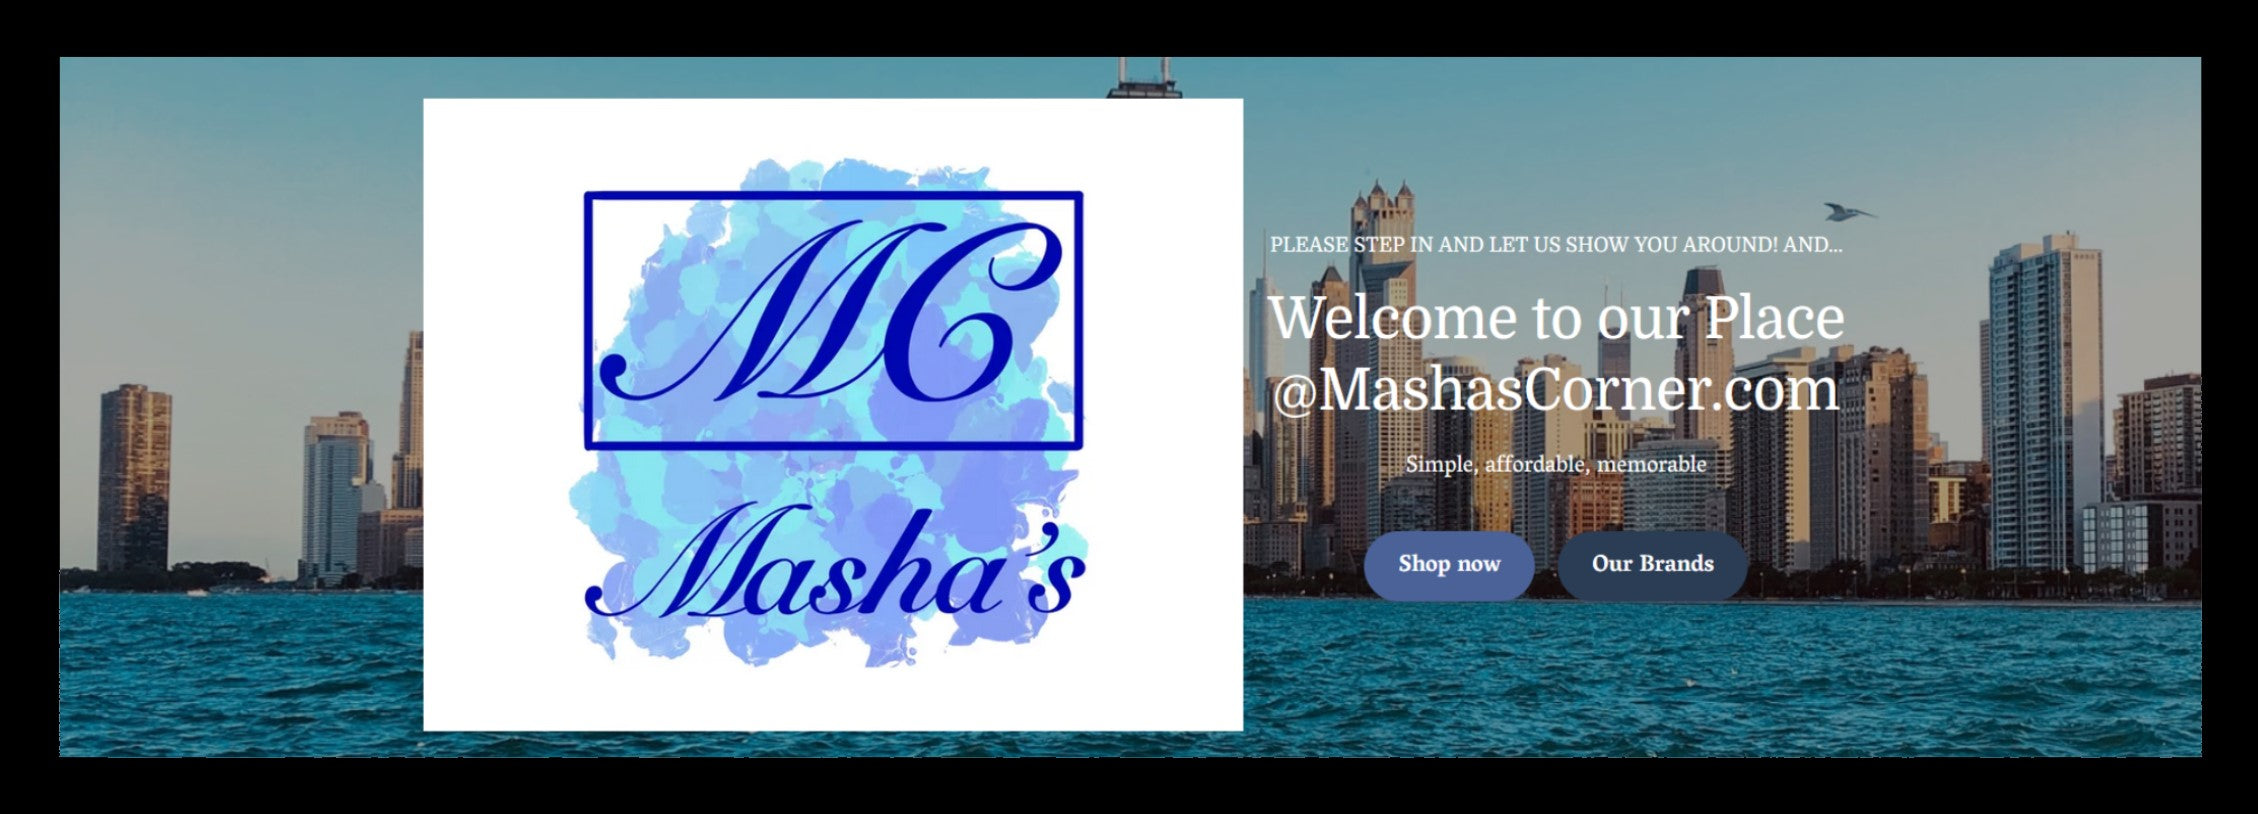 MashasCorner.com Poshmark is fun because we like making deals and work hard to quickly attend to any concerns. We enjoy a number of long-term clients that keep coming back to us, and have found items that they like. We always are very happy to serve.